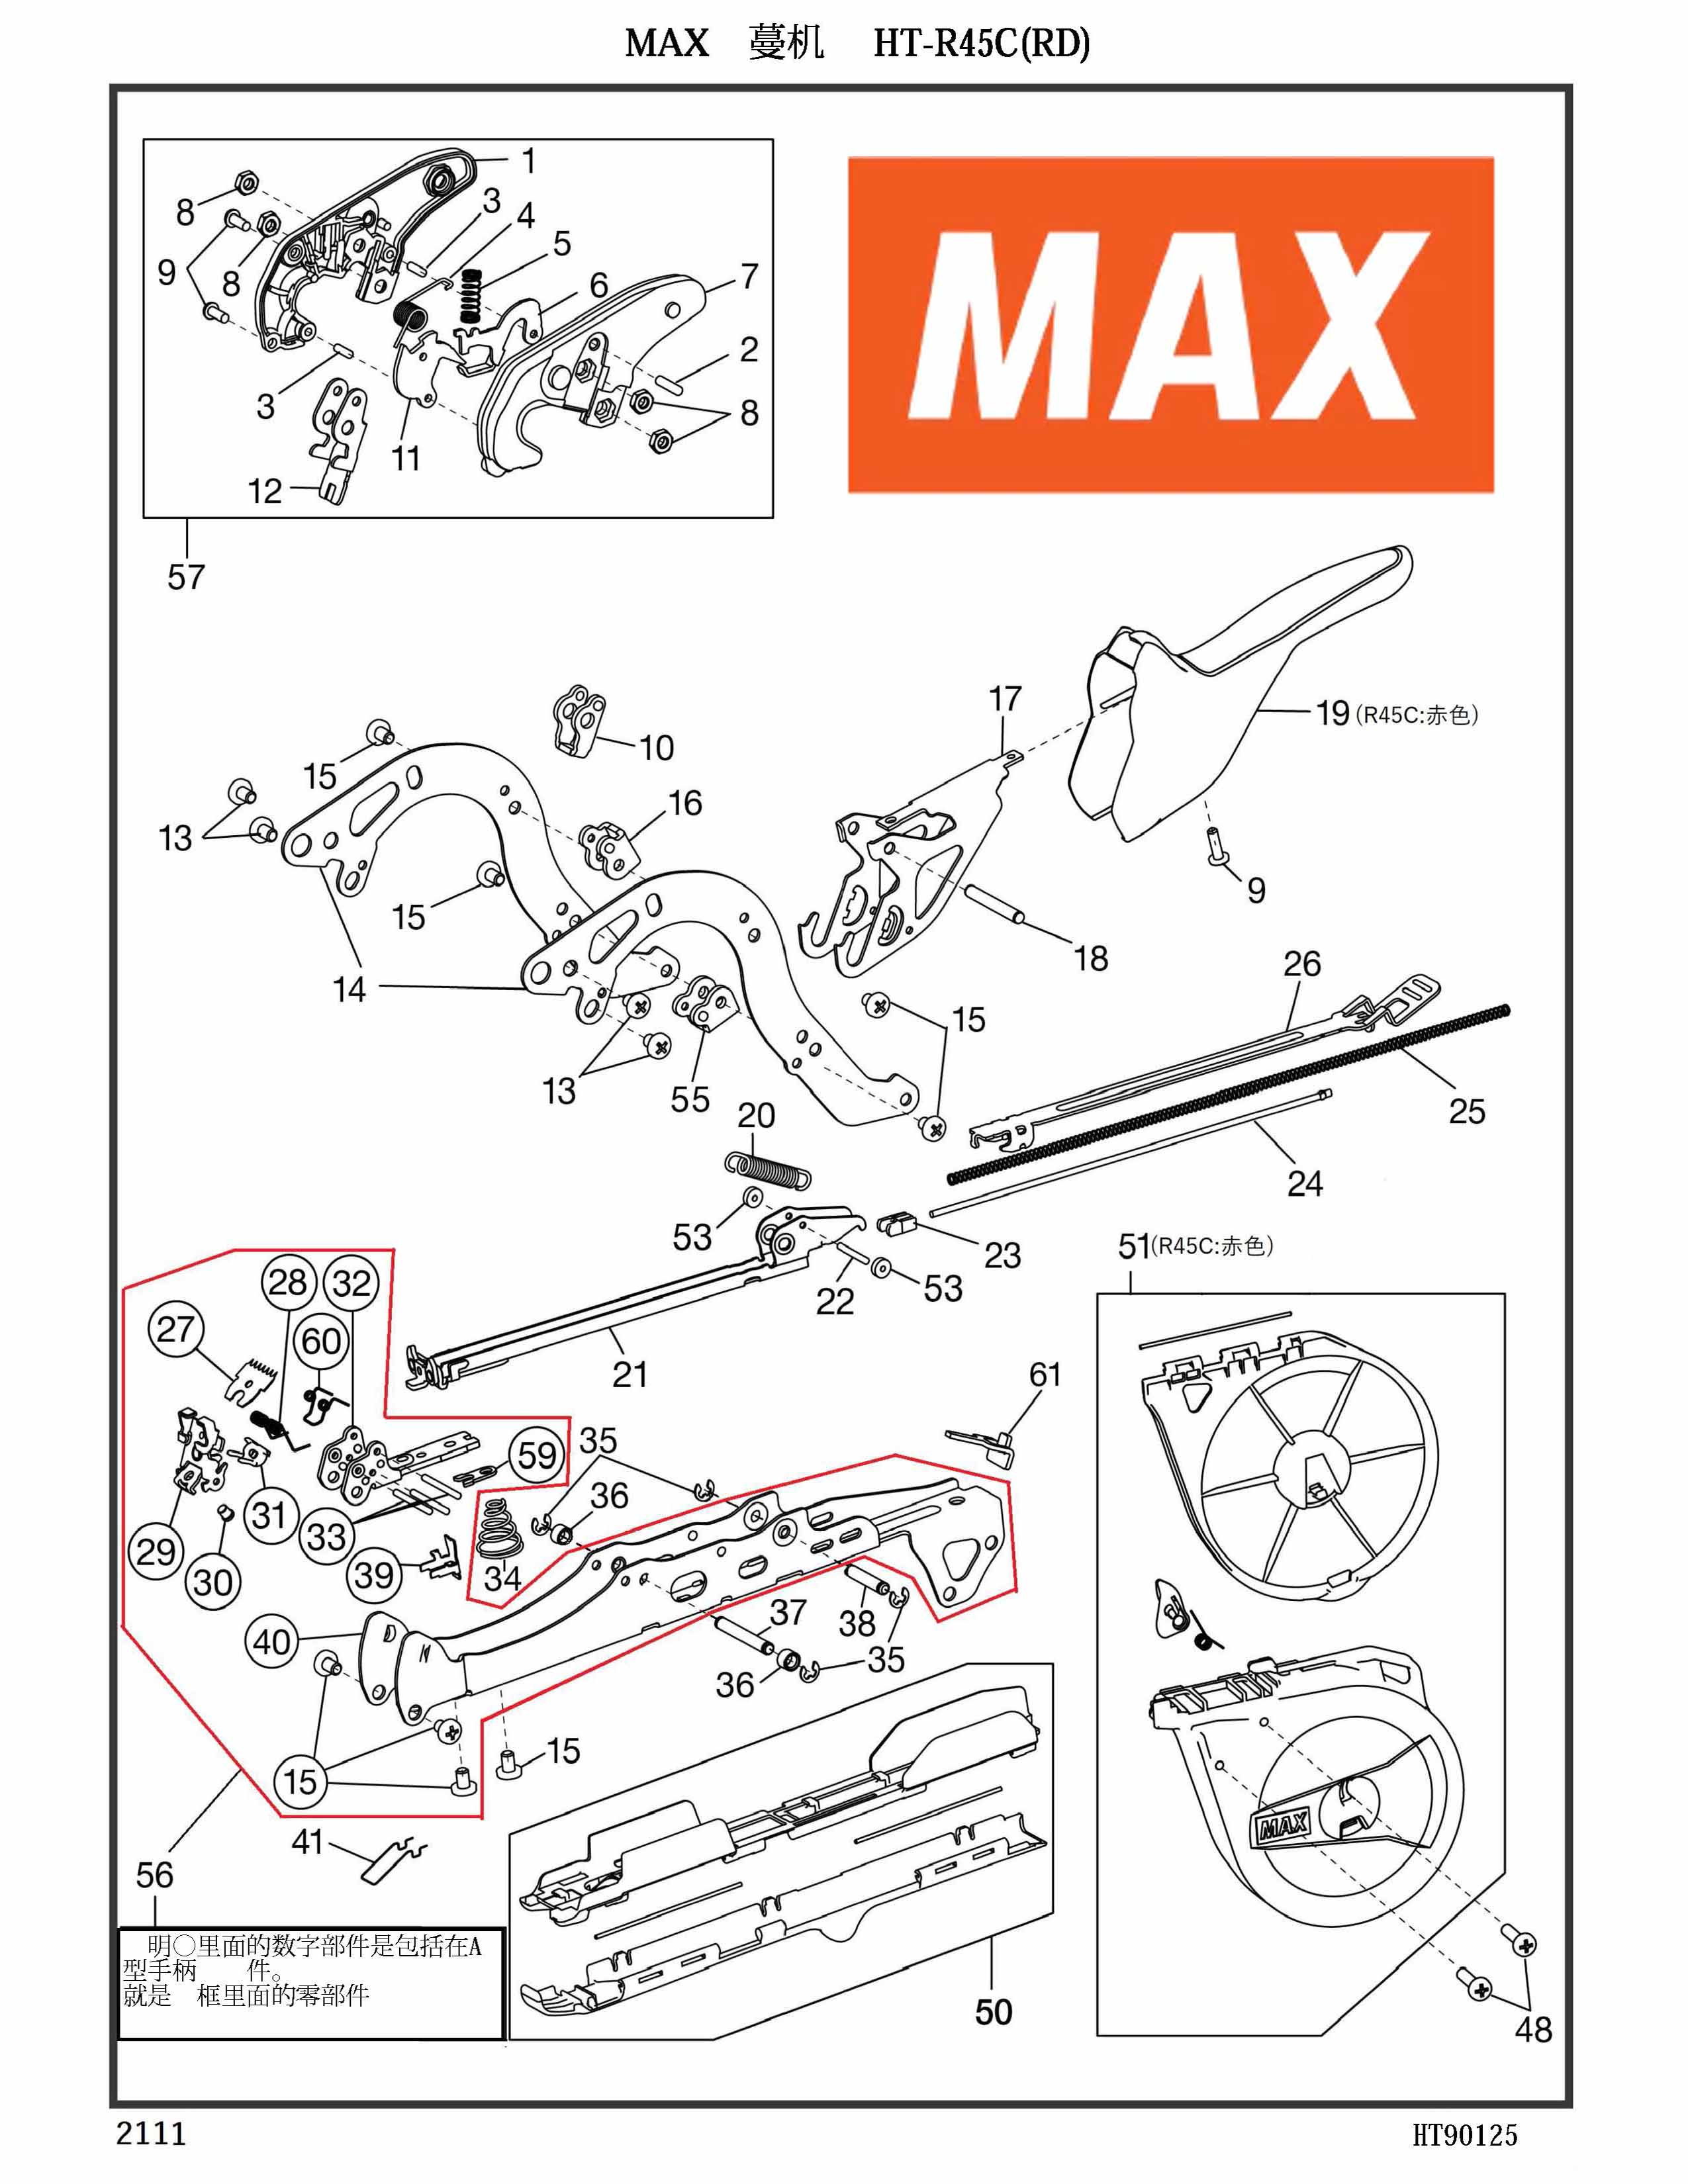 MAX Tapener Part HT11763 TAPE GUIDE SUPPORT S(R45C) Fits MAX HT-R45L(O) R45C(RD) HT-S45E #31